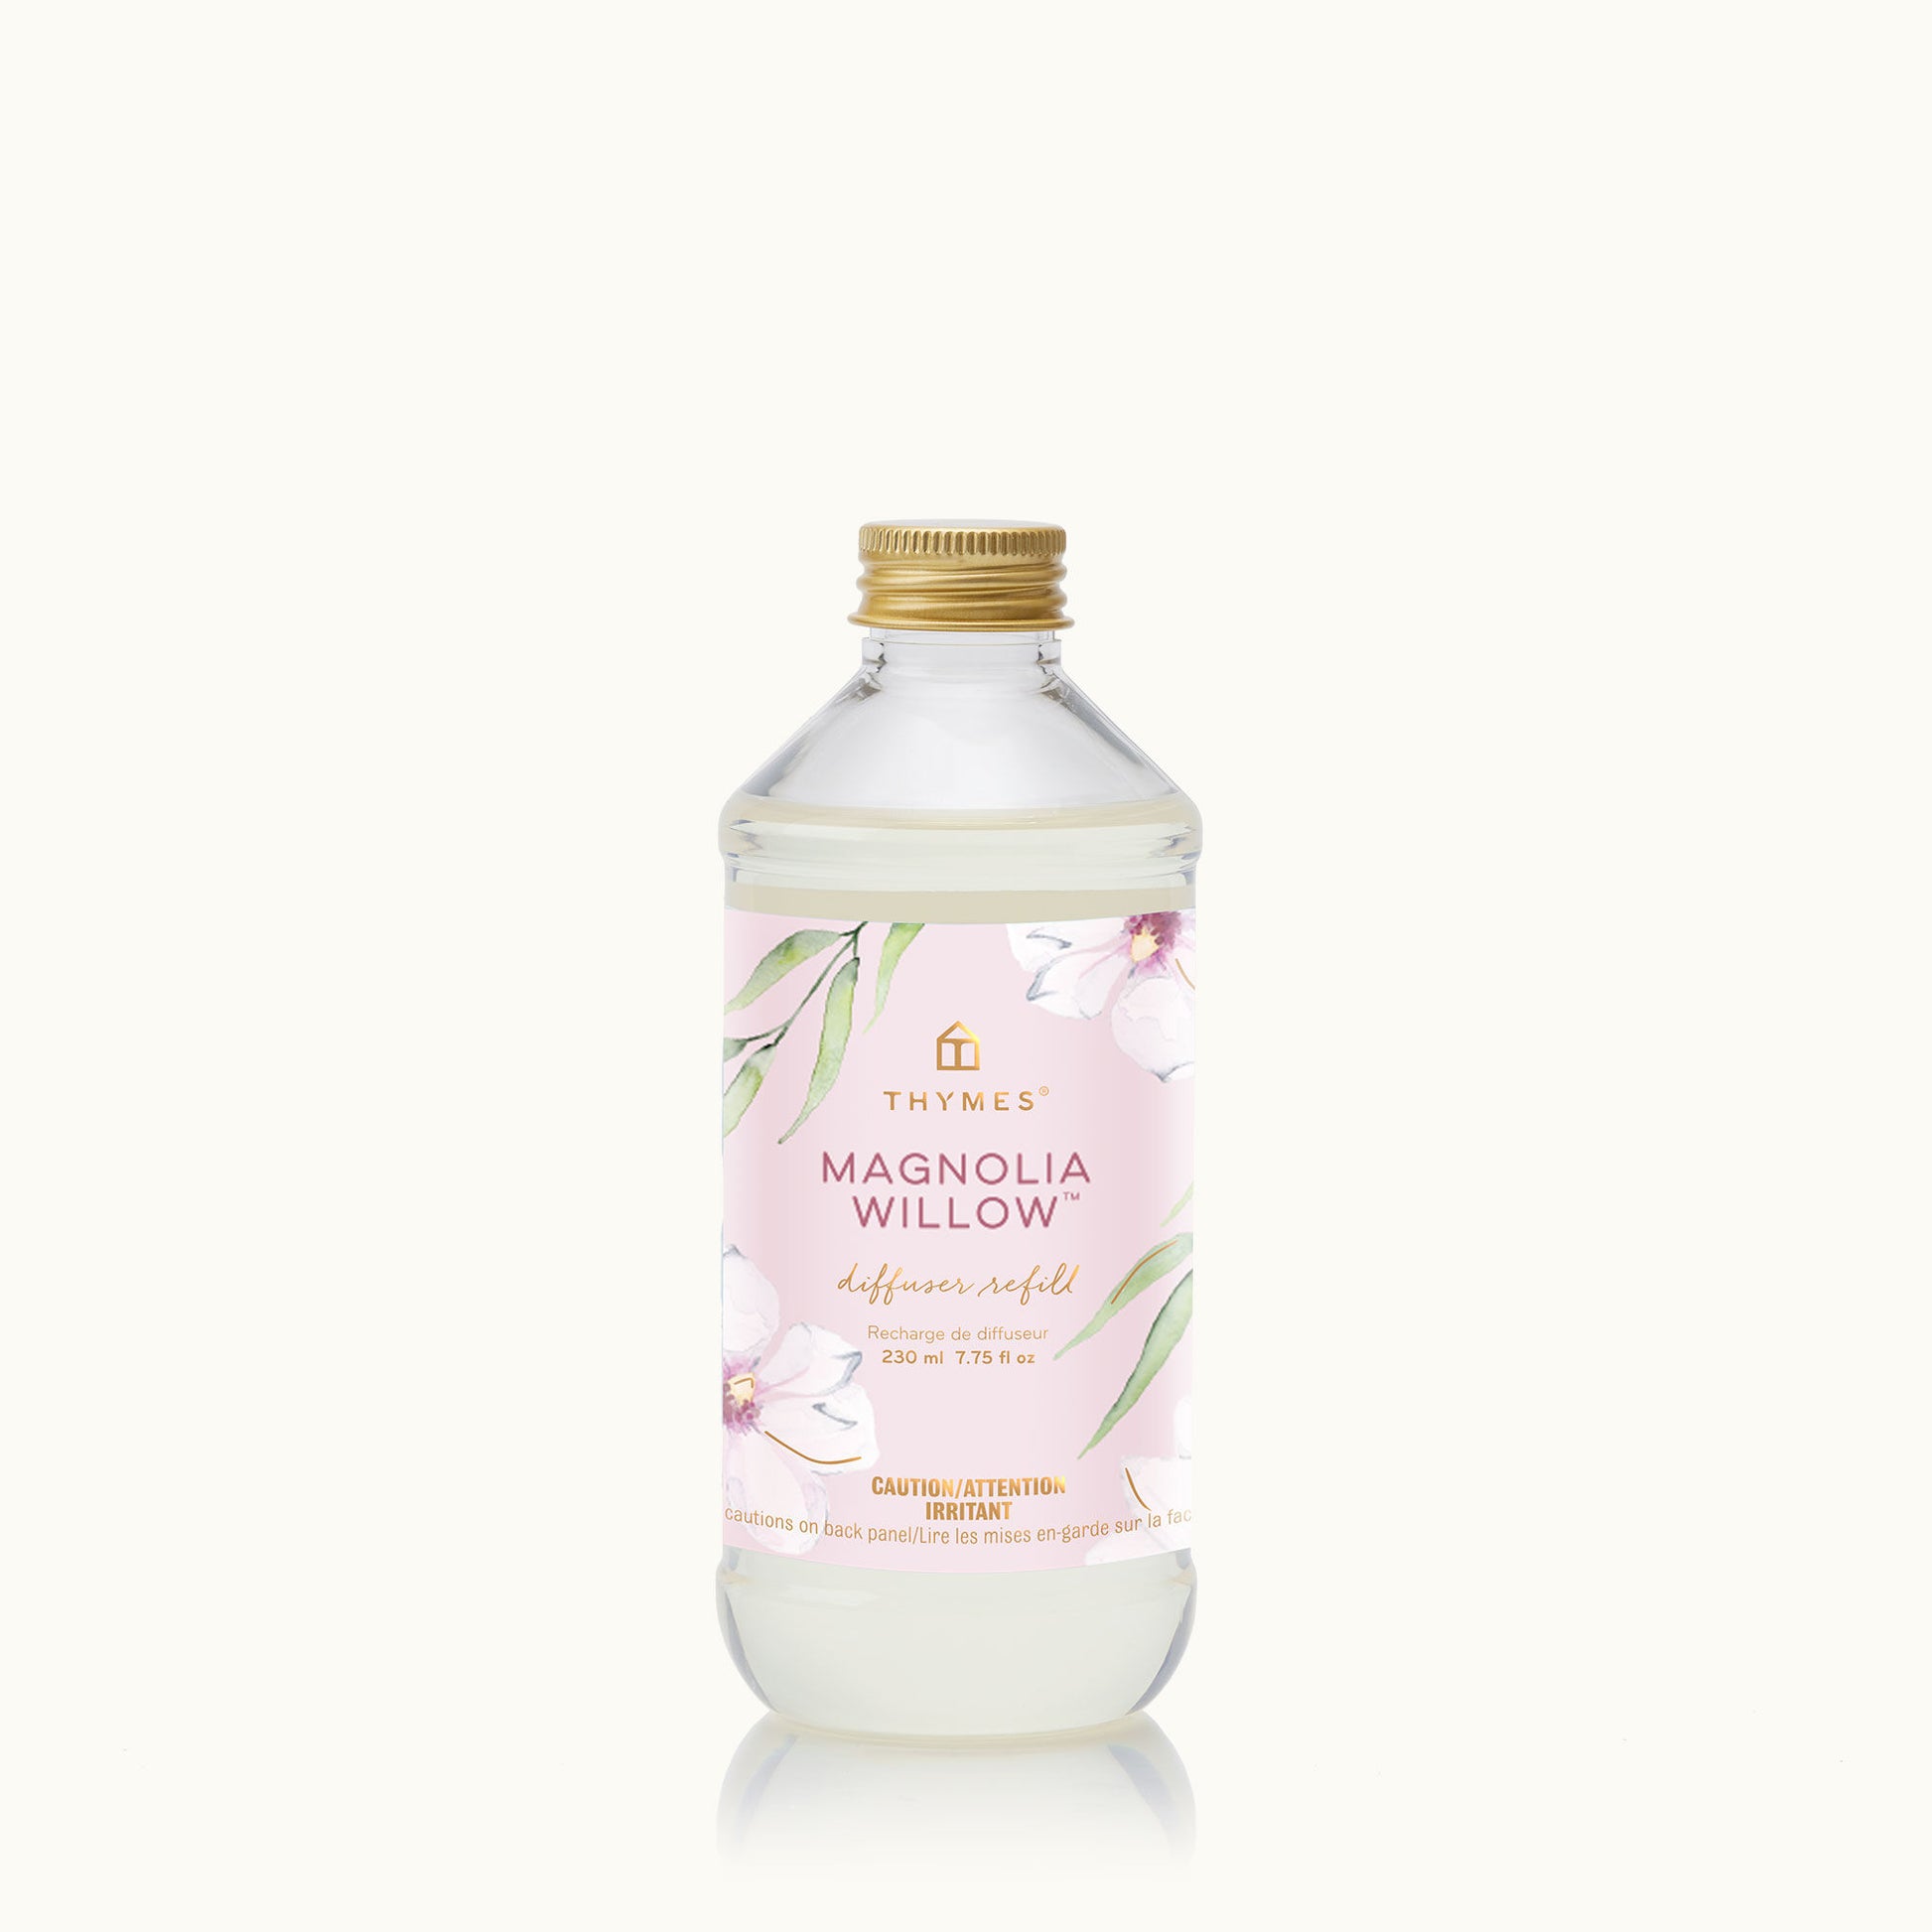 Magnolia Willow Diffuser Oil Refill Gifts Thymes   